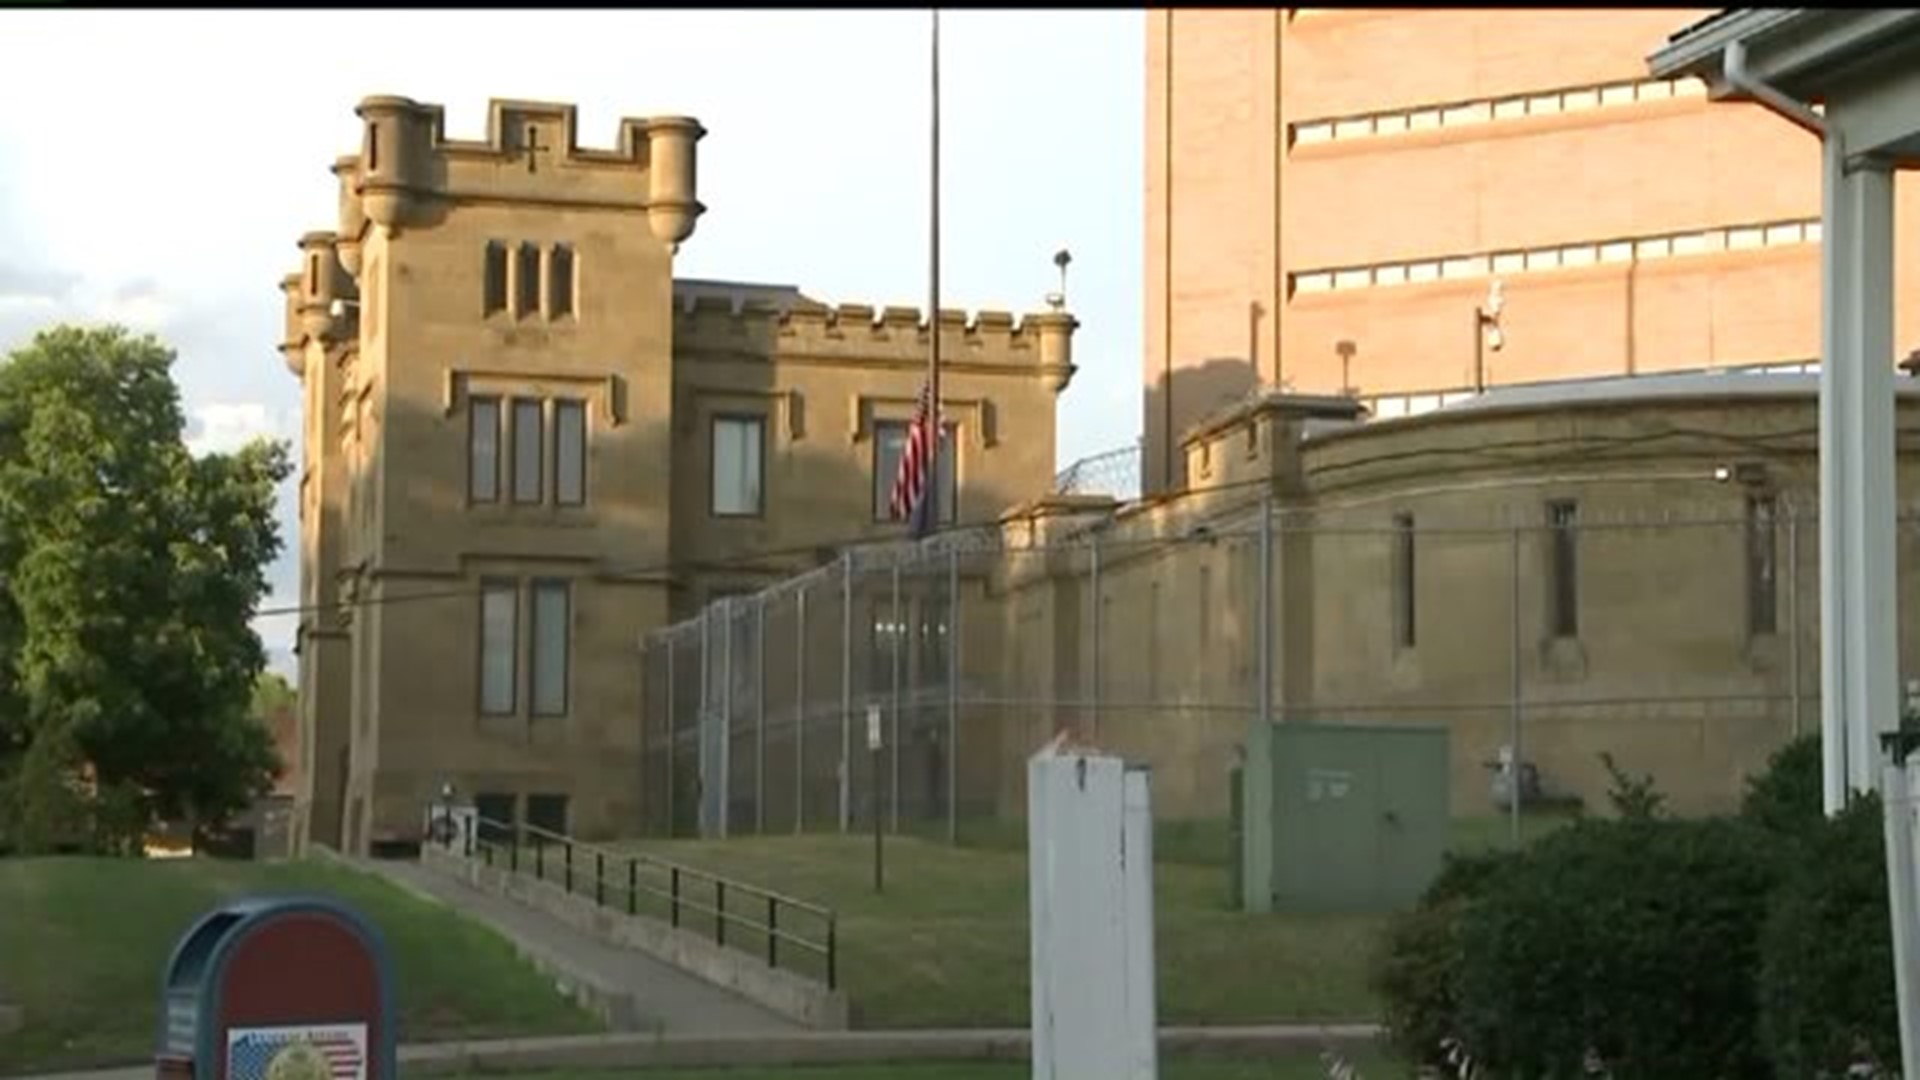 Calls to Better Protect Corrections Officers